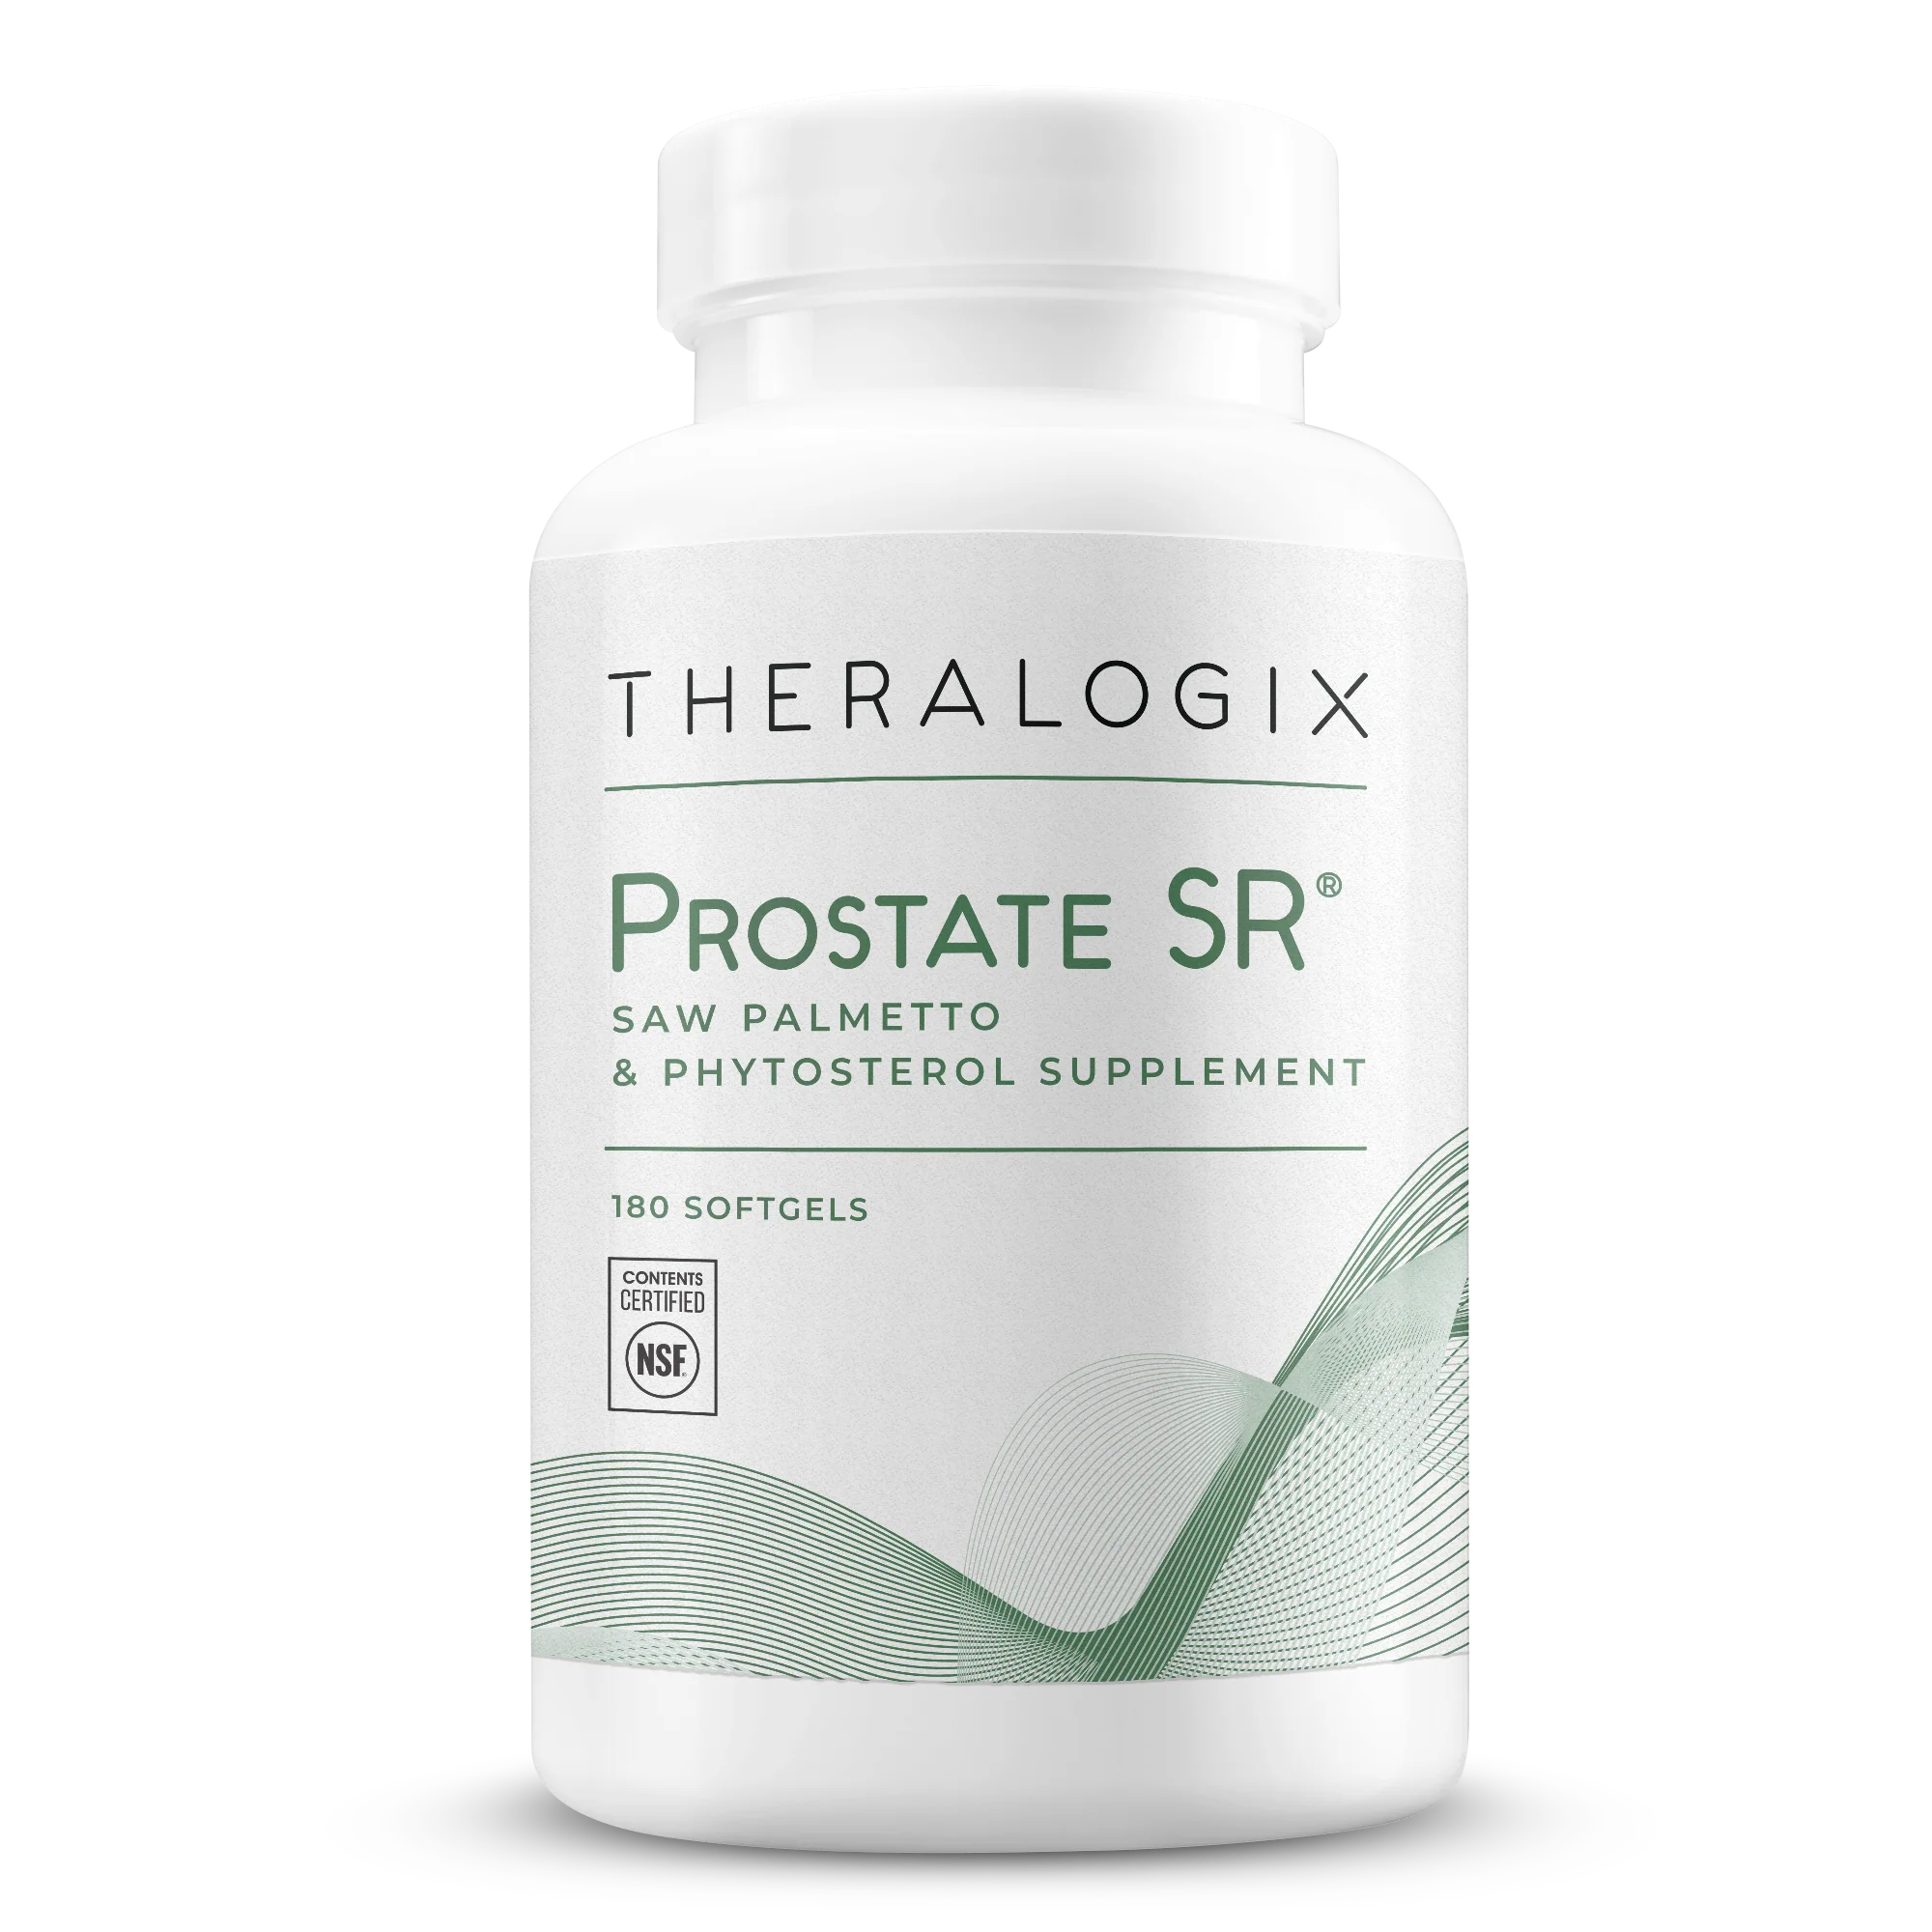 Prostate SR® Saw Palmetto & Phytosterol Supplement (Ships from the US, arrives in 11-14 days)